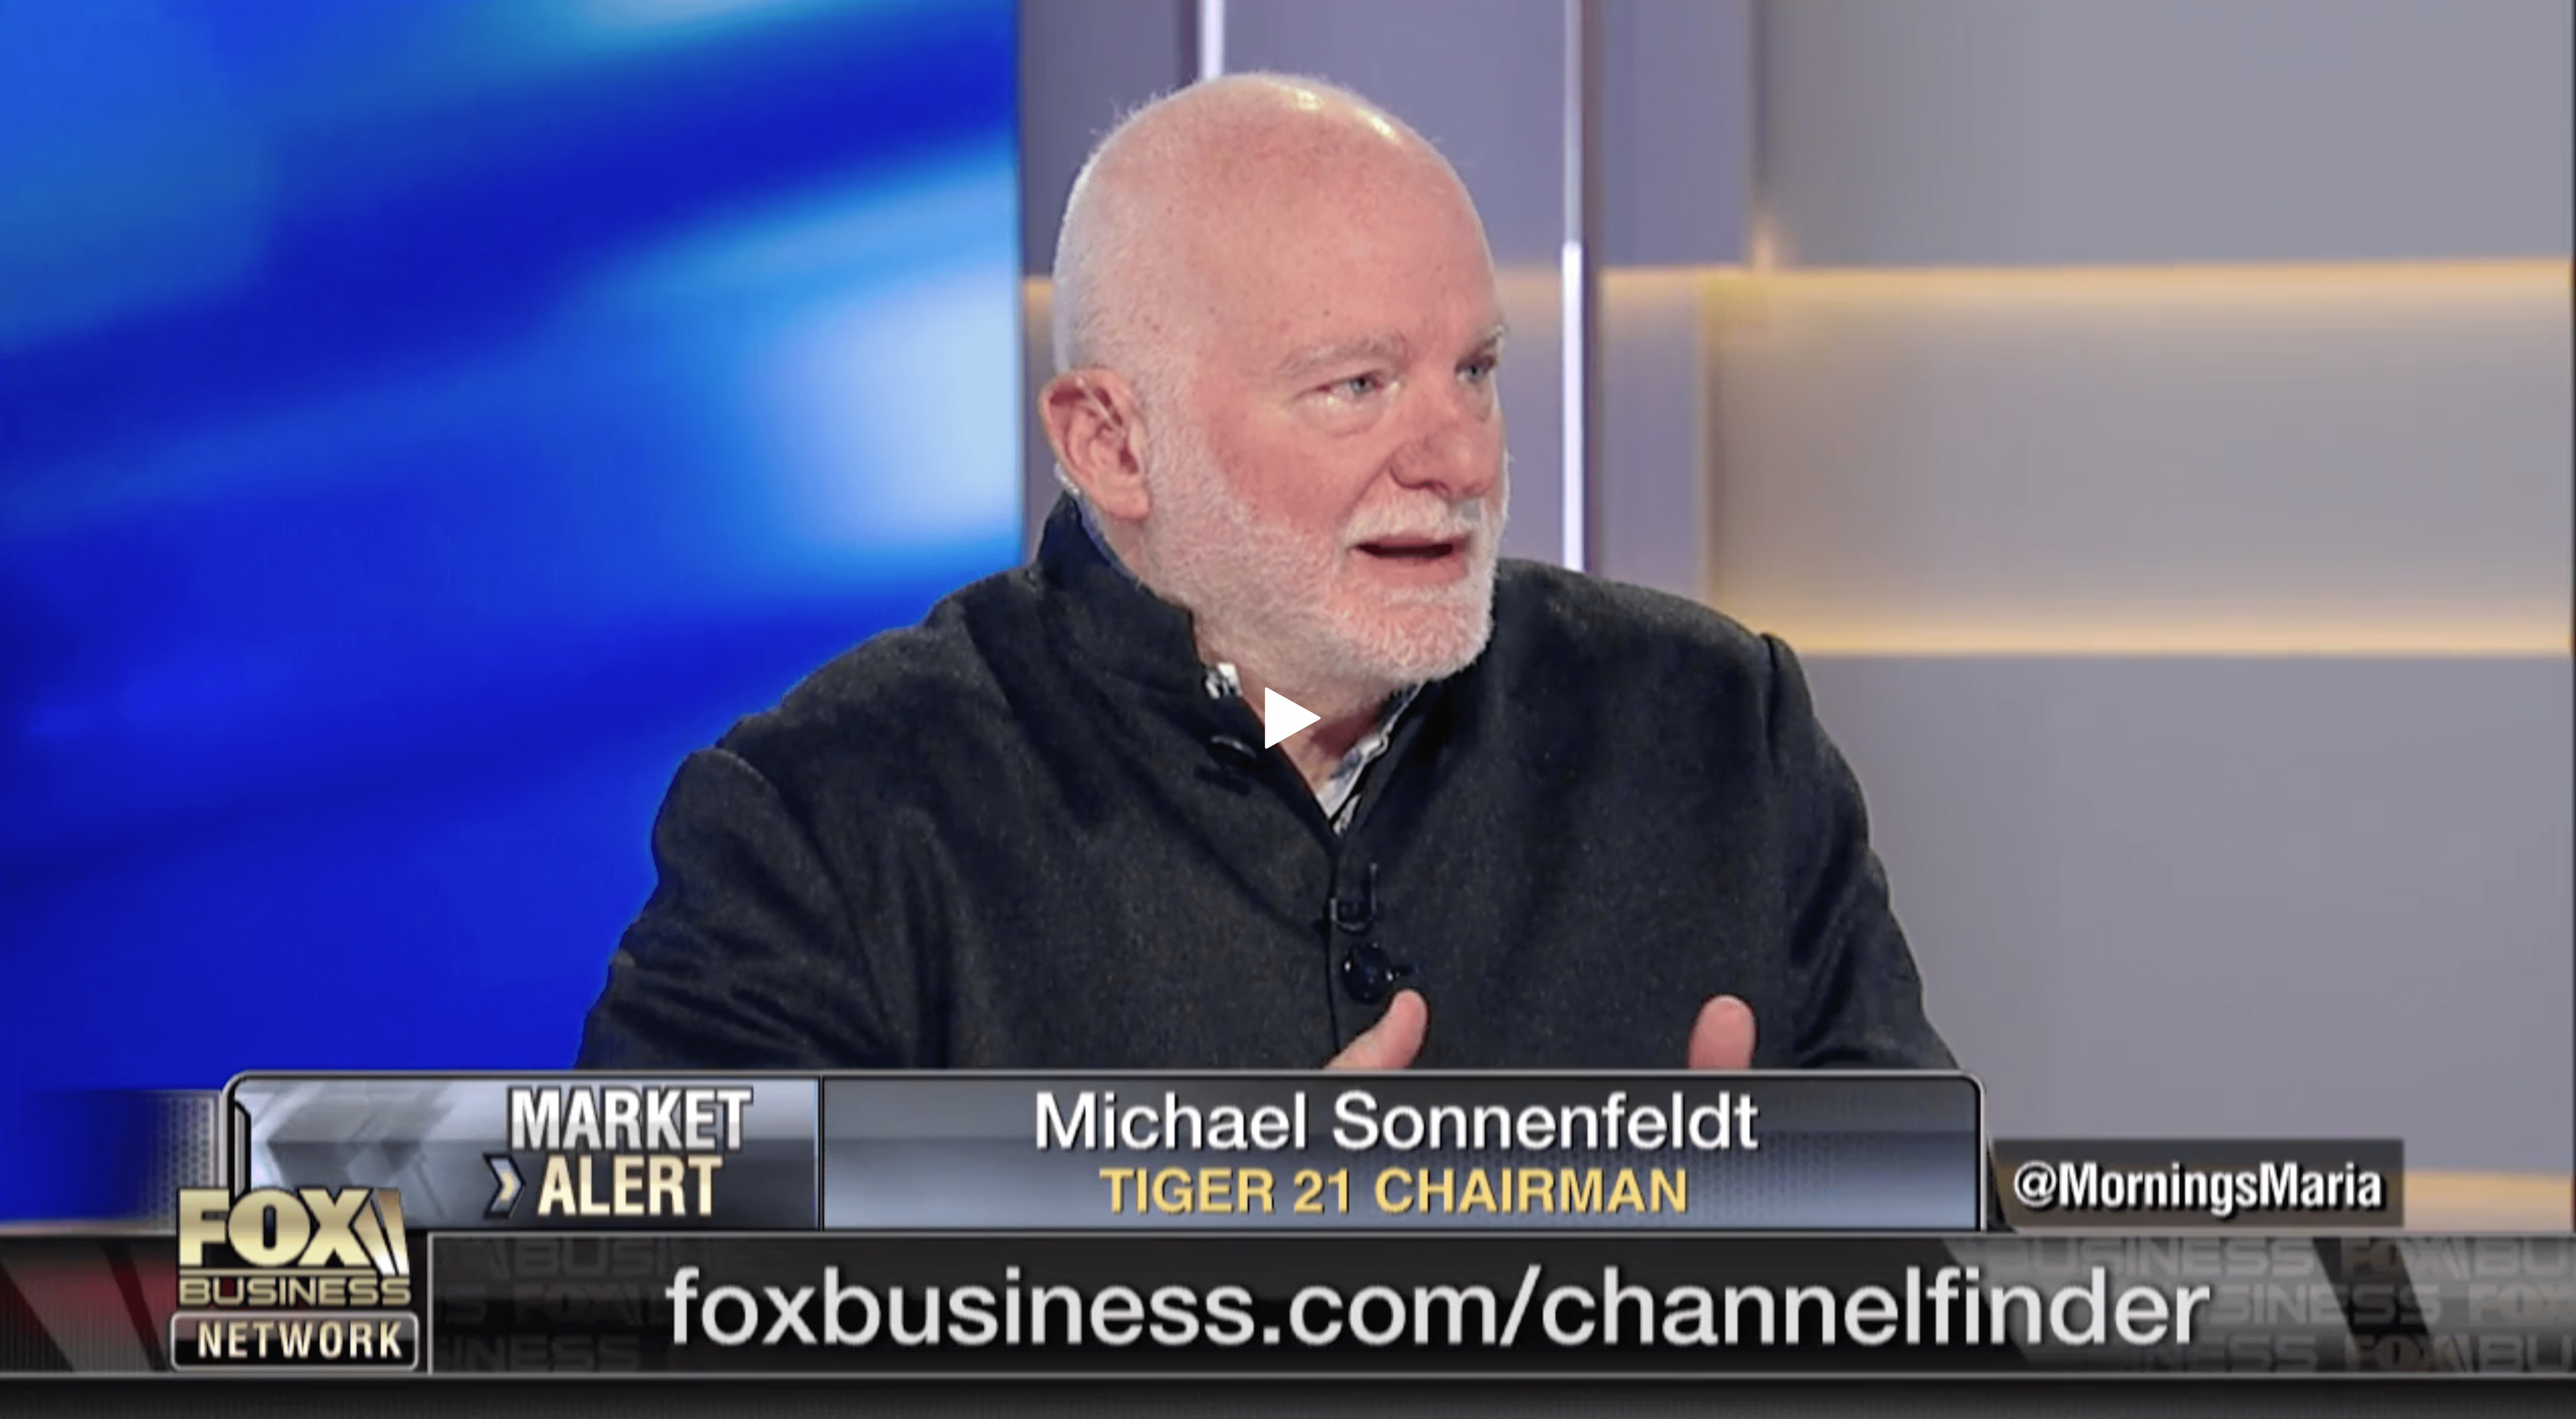 TIGER 21 FOUNDER DISCUSSES THE MARKET OUTLOOK ON FOX BUSINESS